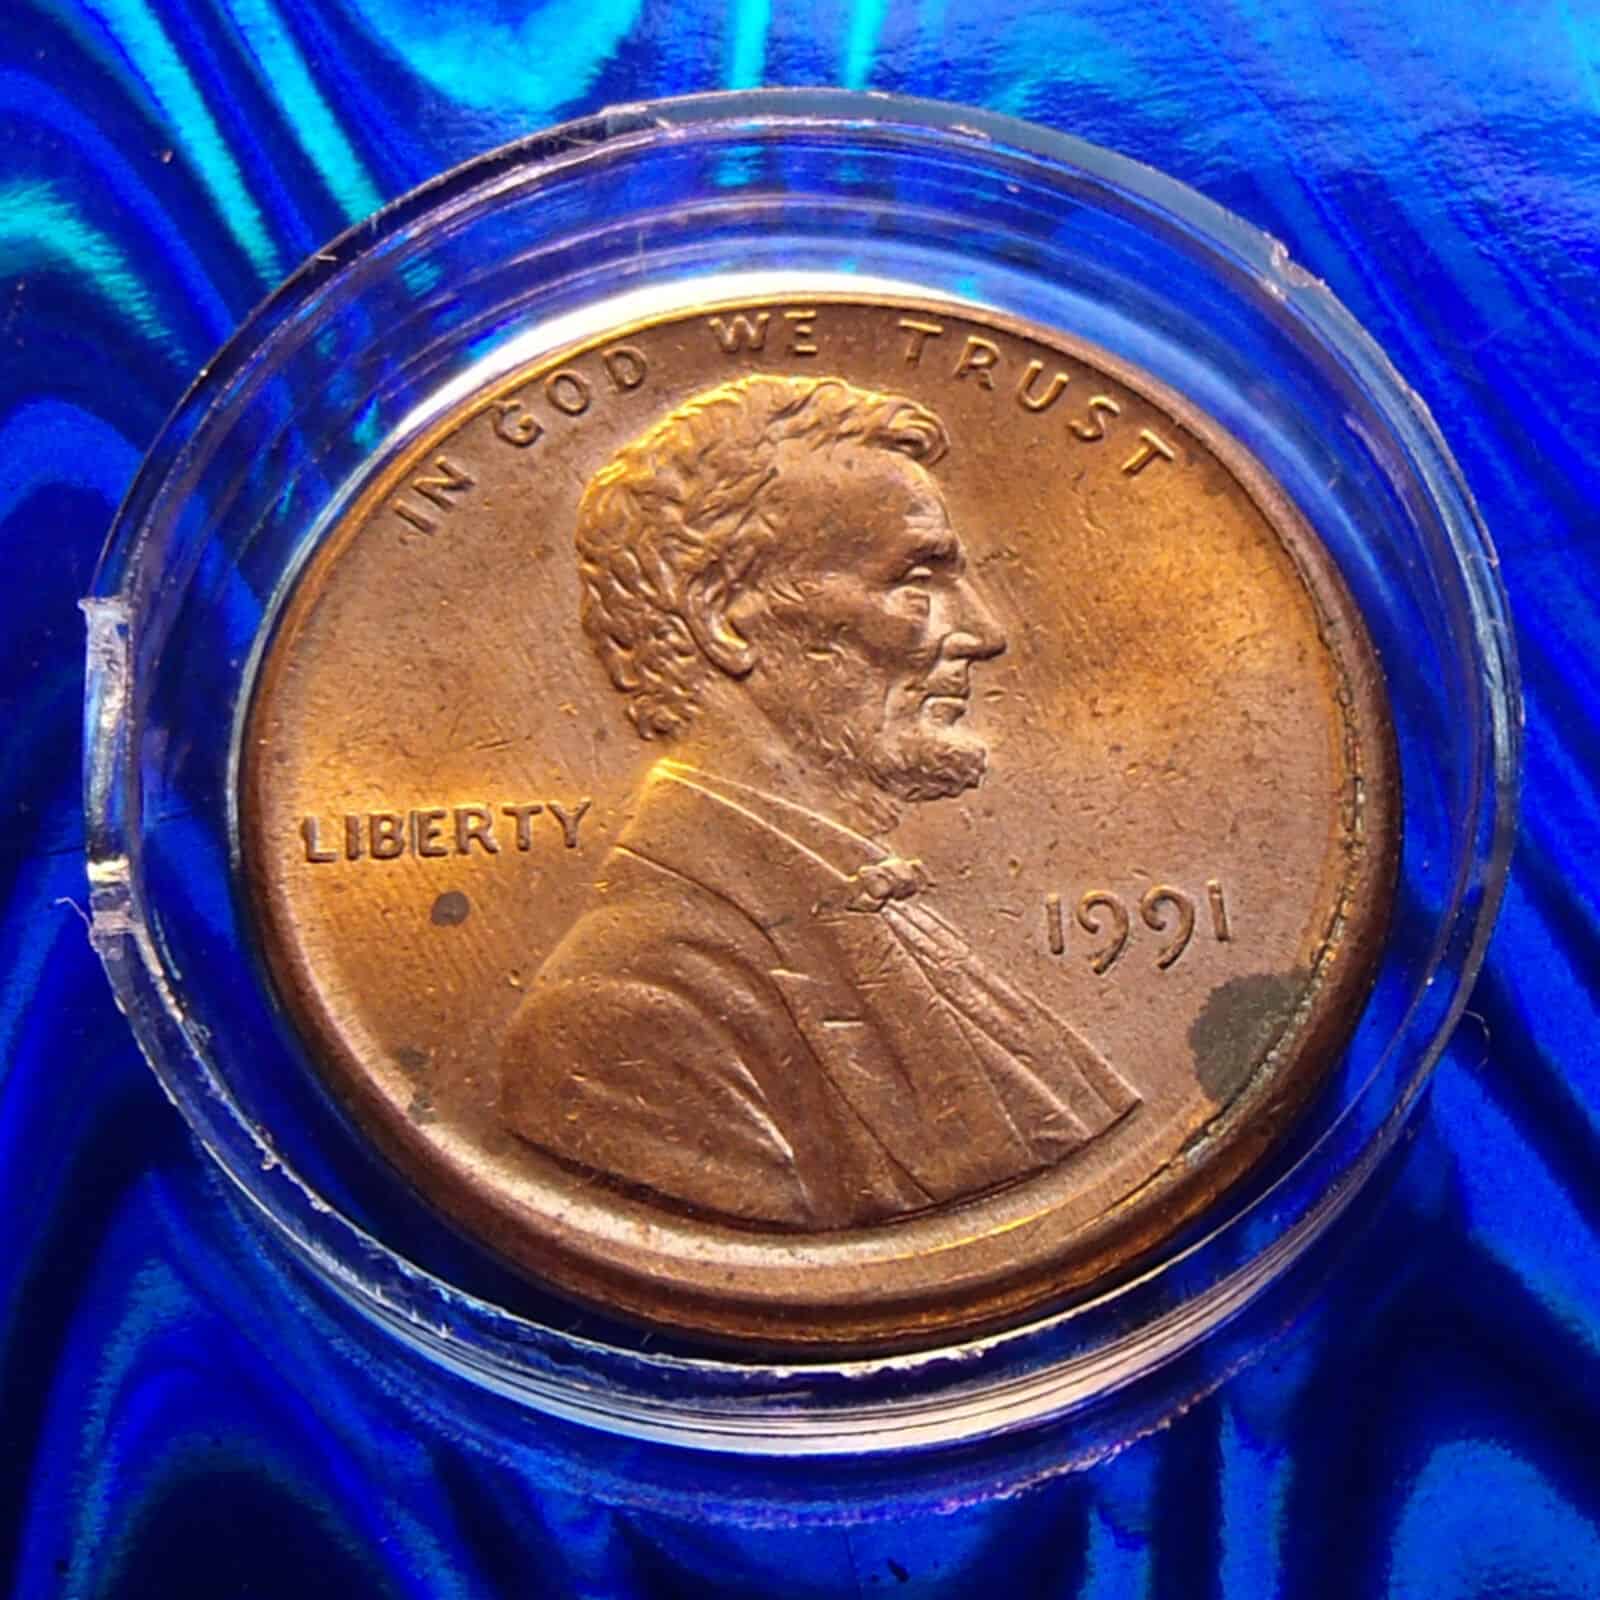 1991 Penny - 5% Off Center and Double Denomination Error